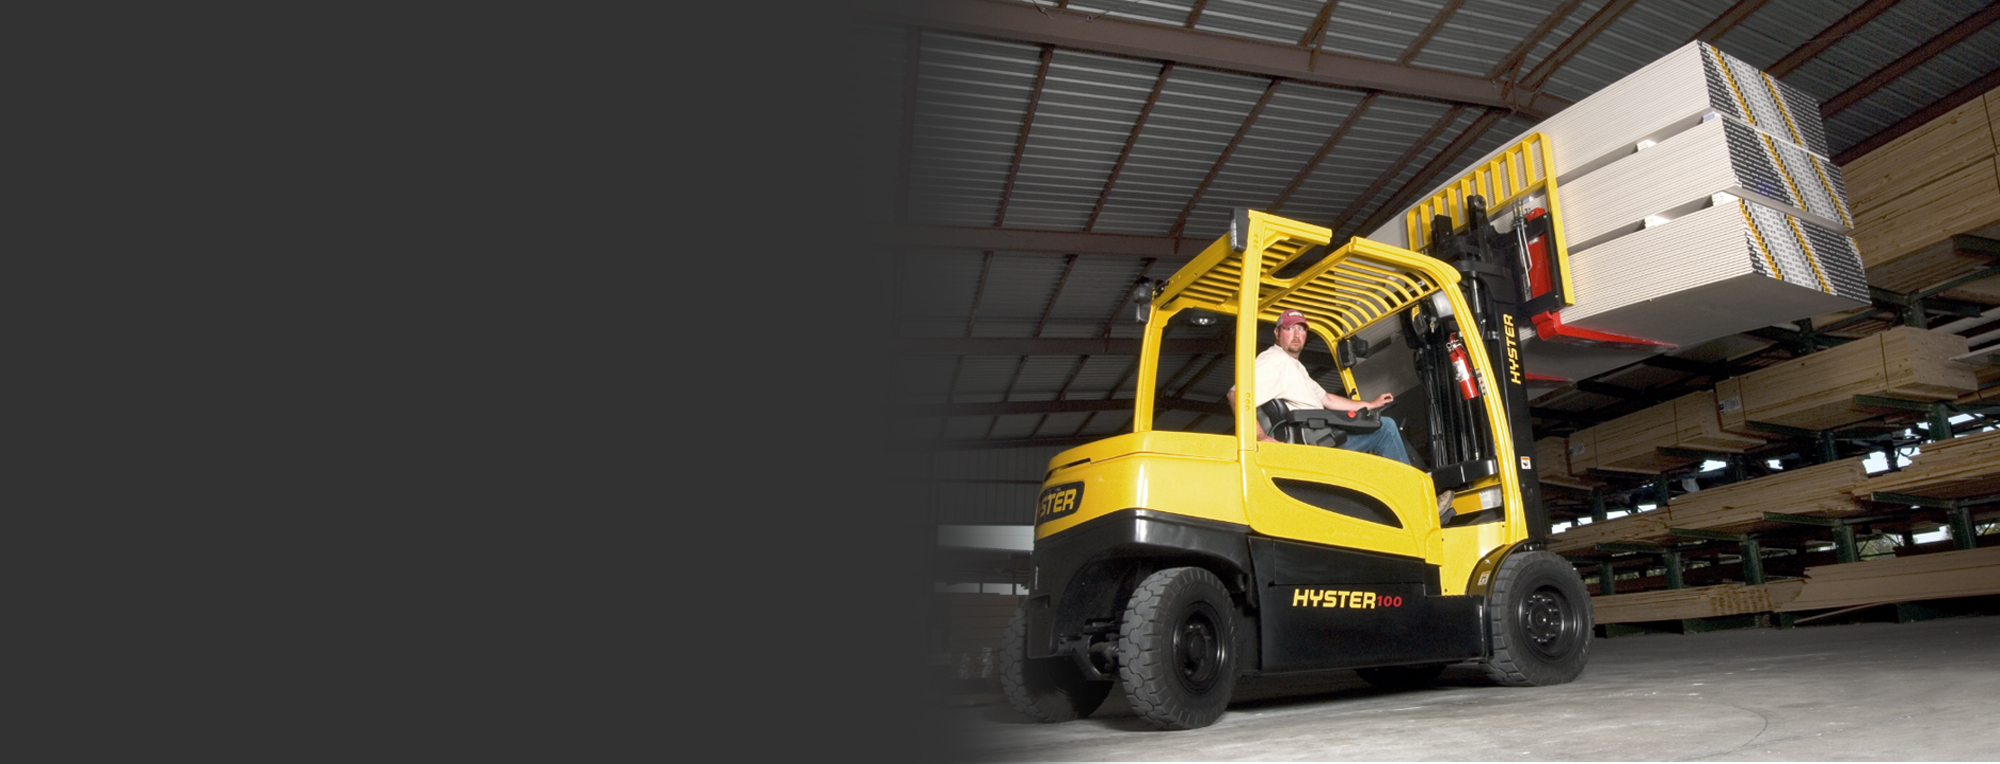 Yellow Hyster forklift lifting wood